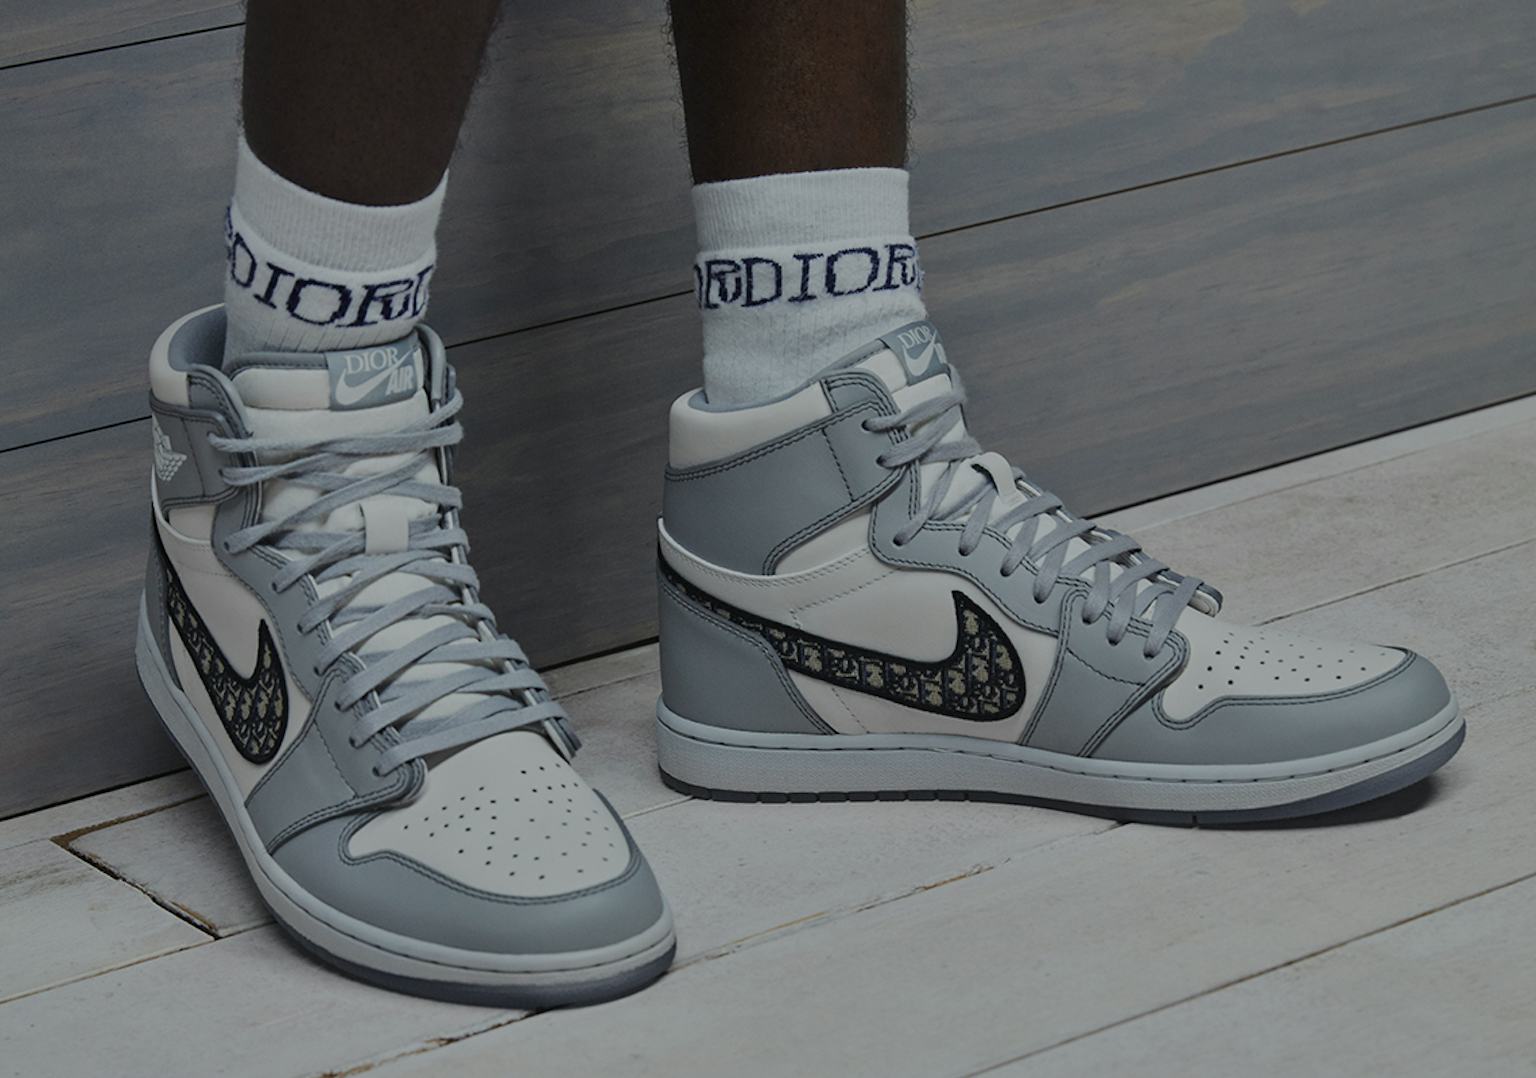 Dior's Air Jordan collection is finally dropping next month